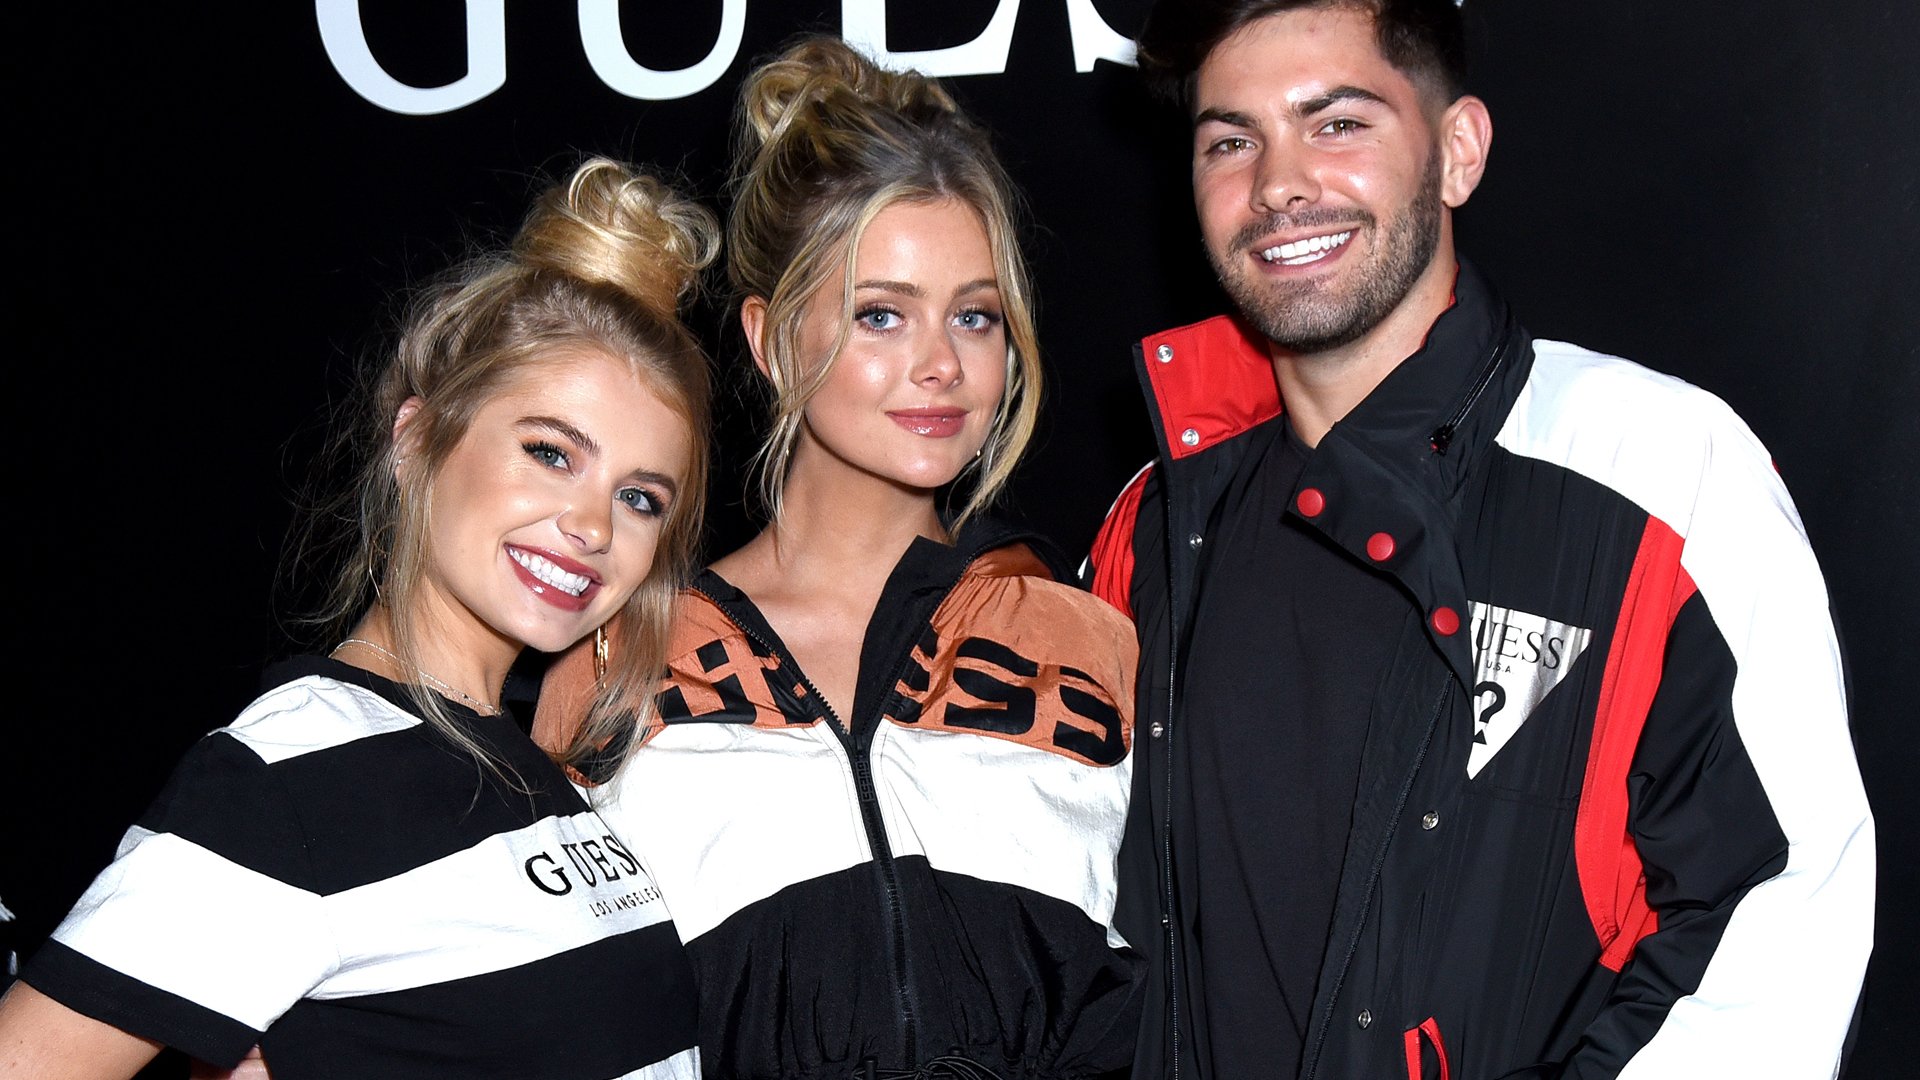 Bachelor Nation stars Demi Burnett, Hannah Godwin and Dylan Barbour attend GUESS Kicks-off Holiday Season at The Peppermint Club on November 07, 2019 in Los Angeles, California.